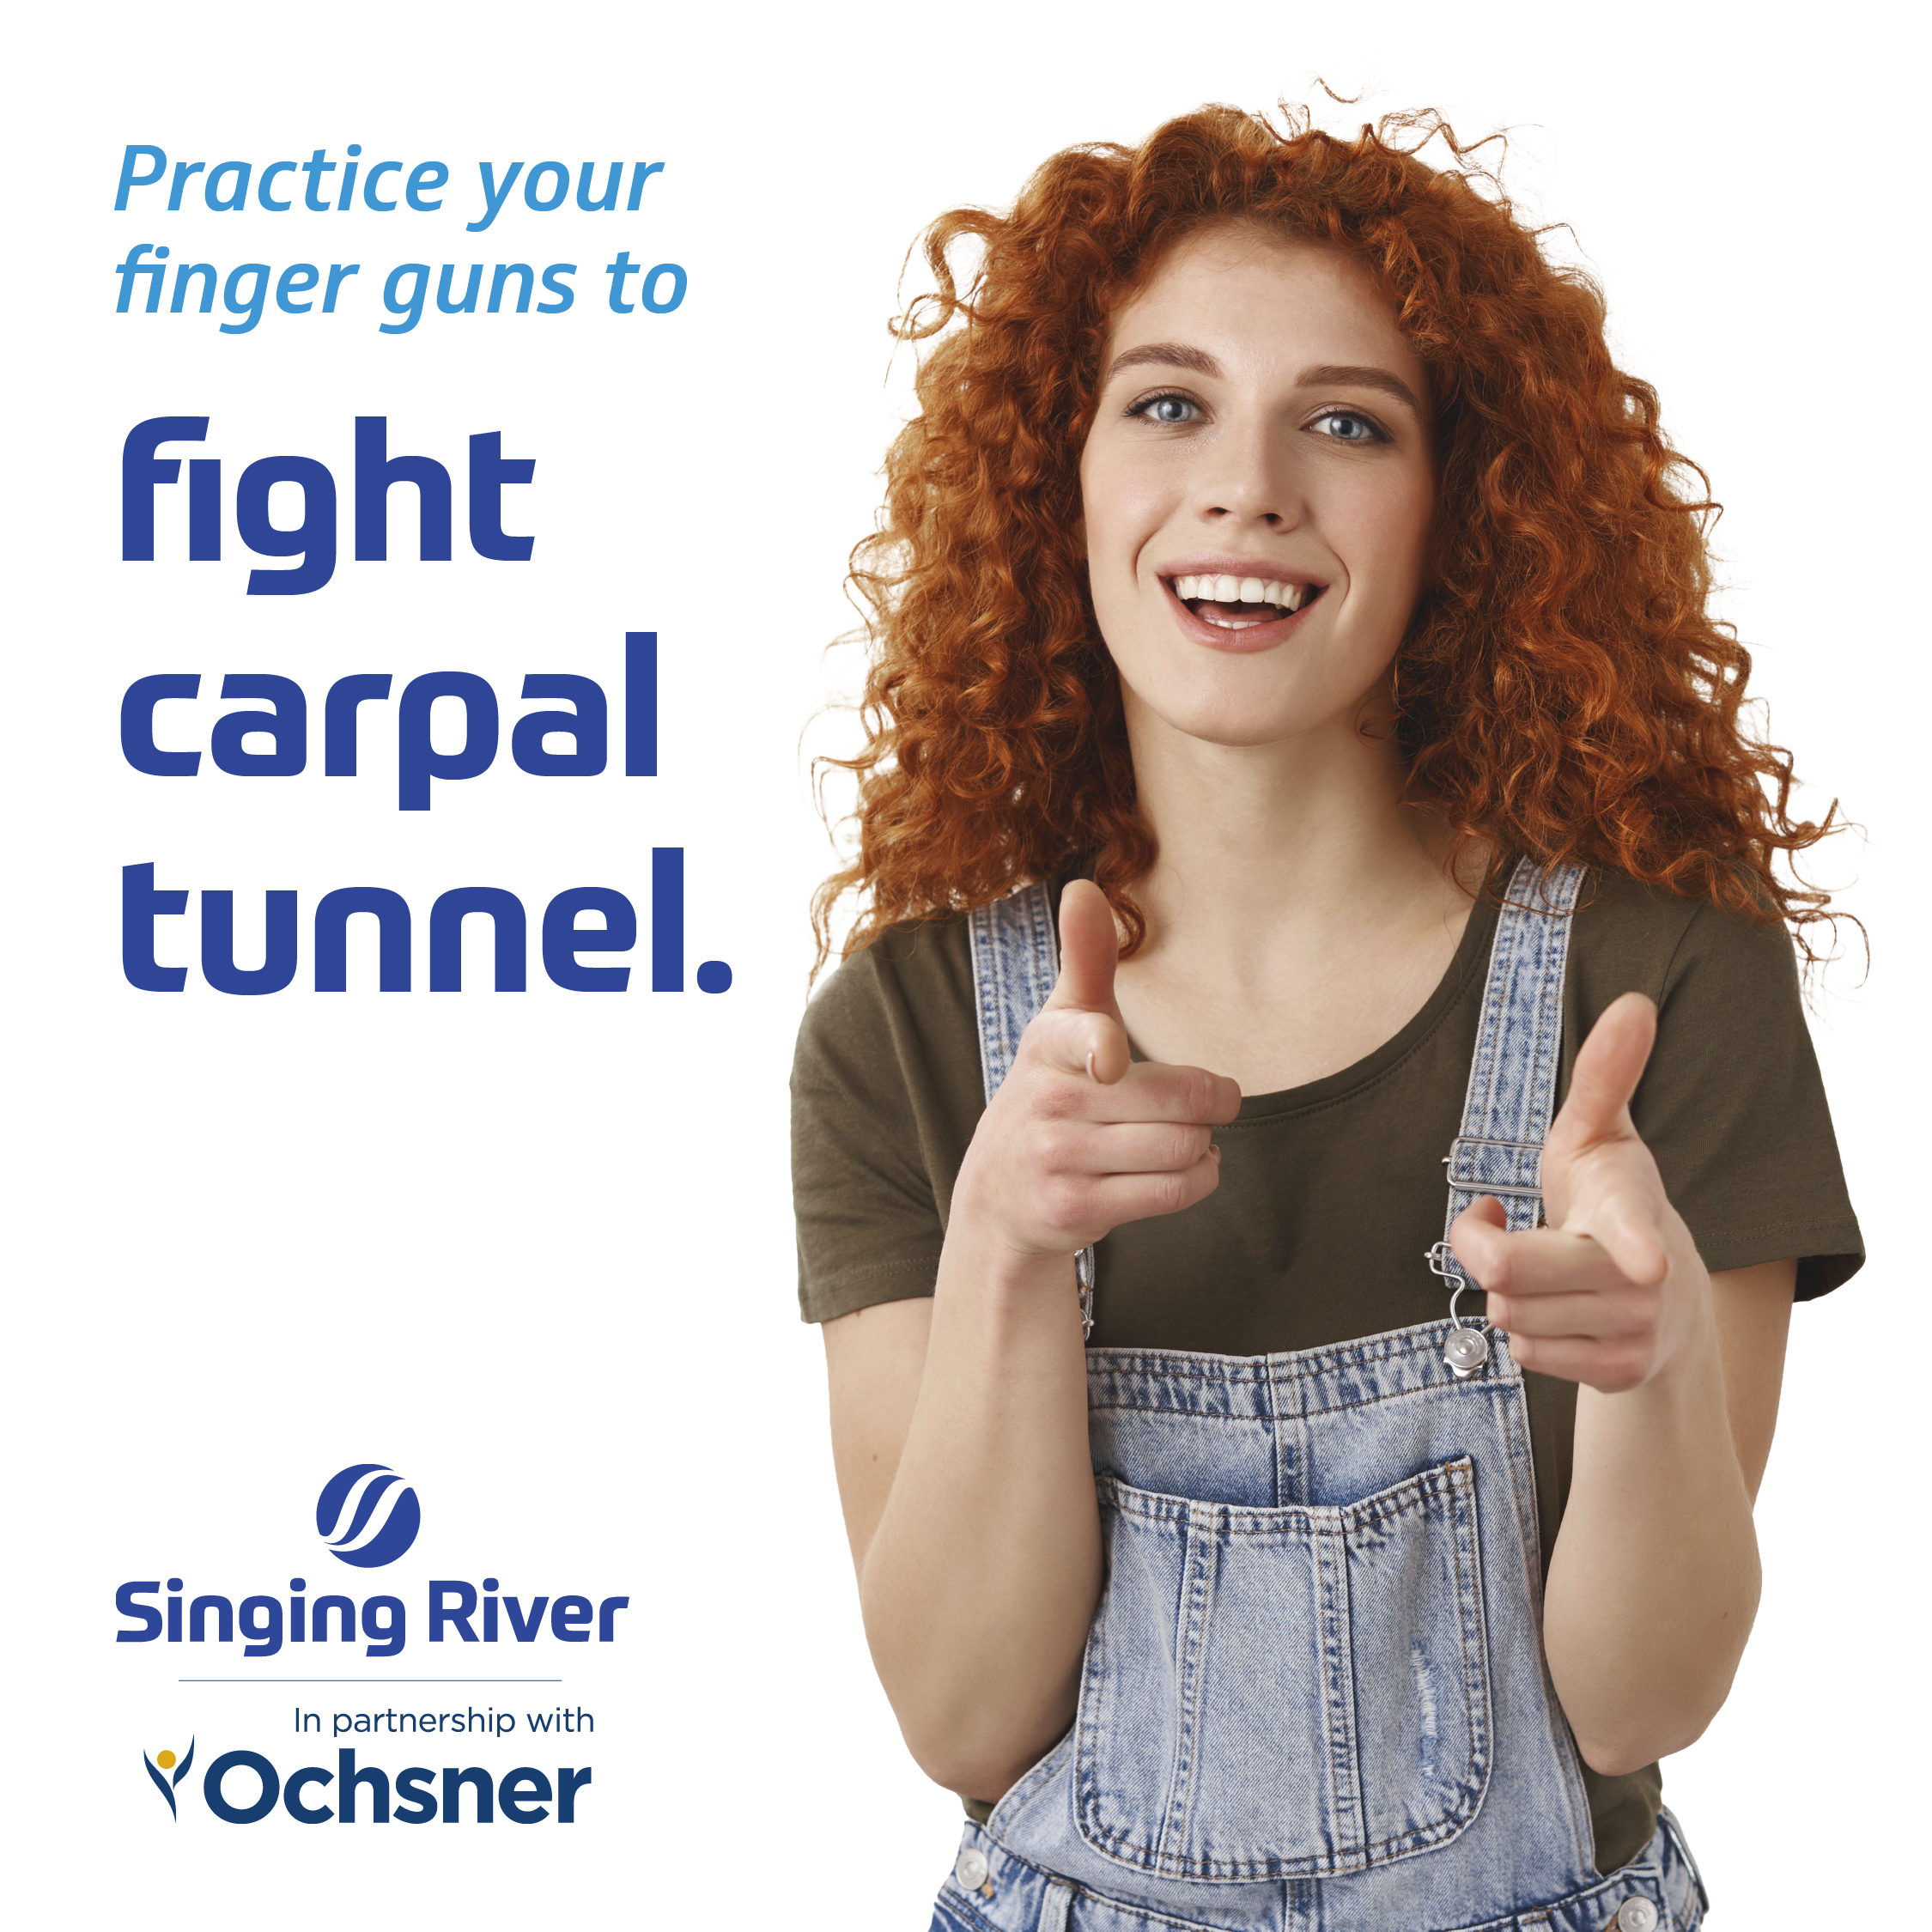 Practice your finger guns to fight carpal tunnel.